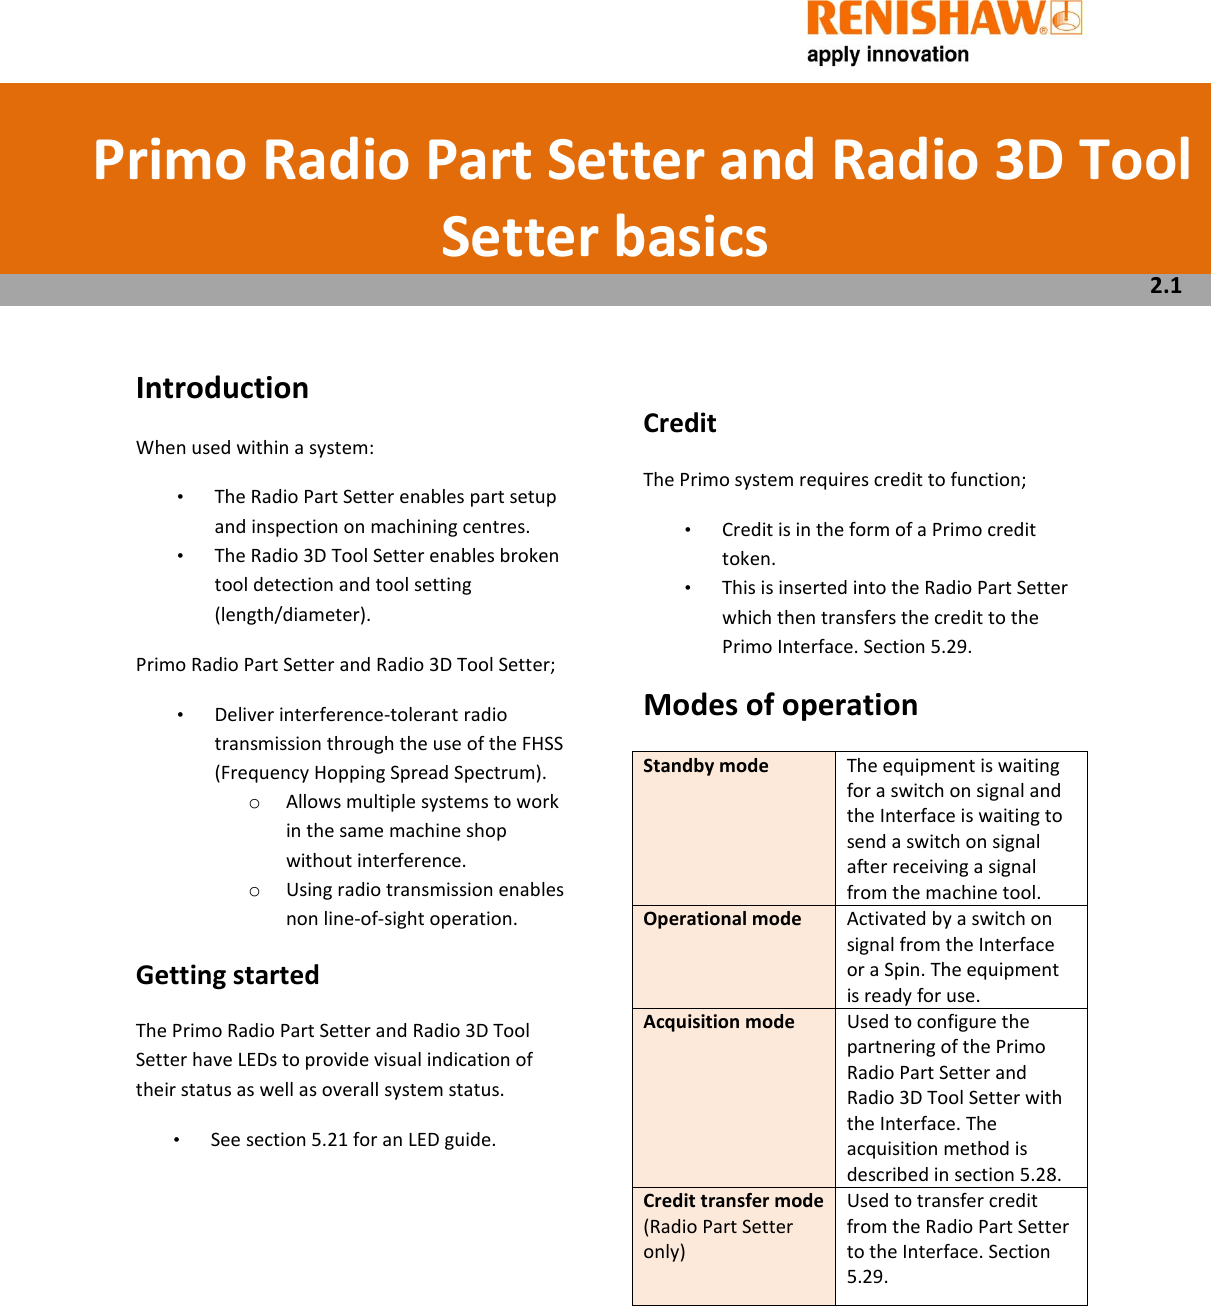        Introduction When used within a system: •  The Radio Part Setter enables part setup and inspection on machining centres.  •  The Radio 3D Tool Setter enables broken tool detection and tool setting (length/diameter). Primo Radio Part Setter and Radio 3D Tool Setter; •  Deliver interference-tolerant radio transmission through the use of the FHSS (Frequency Hopping Spread Spectrum). o Allows multiple systems to work in the same machine shop without interference.  o Using radio transmission enables non line-of-sight operation.  Getting started The Primo Radio Part Setter and Radio 3D Tool Setter have LEDs to provide visual indication of their status as well as overall system status.  •  See section 5.21 for an LED guide.            Credit The Primo system requires credit to function; •  Credit is in the form of a Primo credit token.  •  This is inserted into the Radio Part Setter which then transfers the credit to the Primo Interface. Section 5.29. Modes of operation Standby mode  The equipment is waiting for a switch on signal and the Interface is waiting to send a switch on signal after receiving a signal from the machine tool. Operational mode  Activated by a switch on signal from the Interface or a Spin. The equipment is ready for use. Acquisition mode  Used to configure the partnering of the Primo Radio Part Setter and Radio 3D Tool Setter with the Interface. The acquisition method is described in section 5.28. Credit transfer mode (Radio Part Setter only) Used to transfer credit from the Radio Part Setter to the Interface. Section 5.29.        Primo Radio Part Setter and Radio 3D Tool Setter basics  2.1 